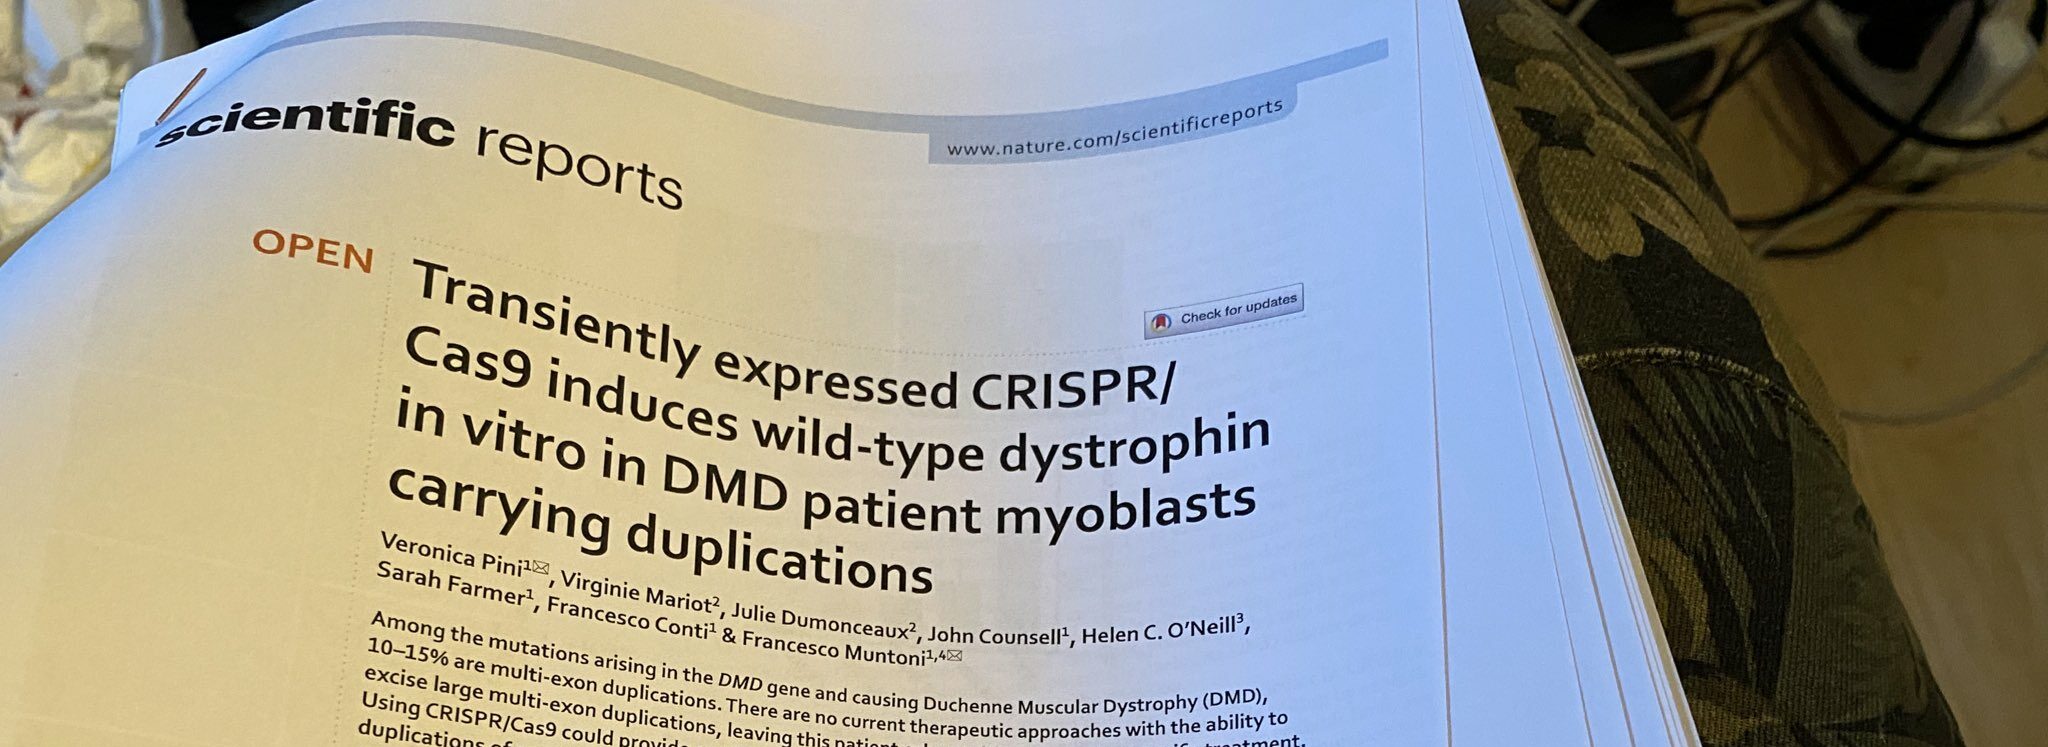 Transiently expressed CRISPR:Cas9 induces wild-type dystrophin in vitro in DMD patient myoblasts carrying duplications